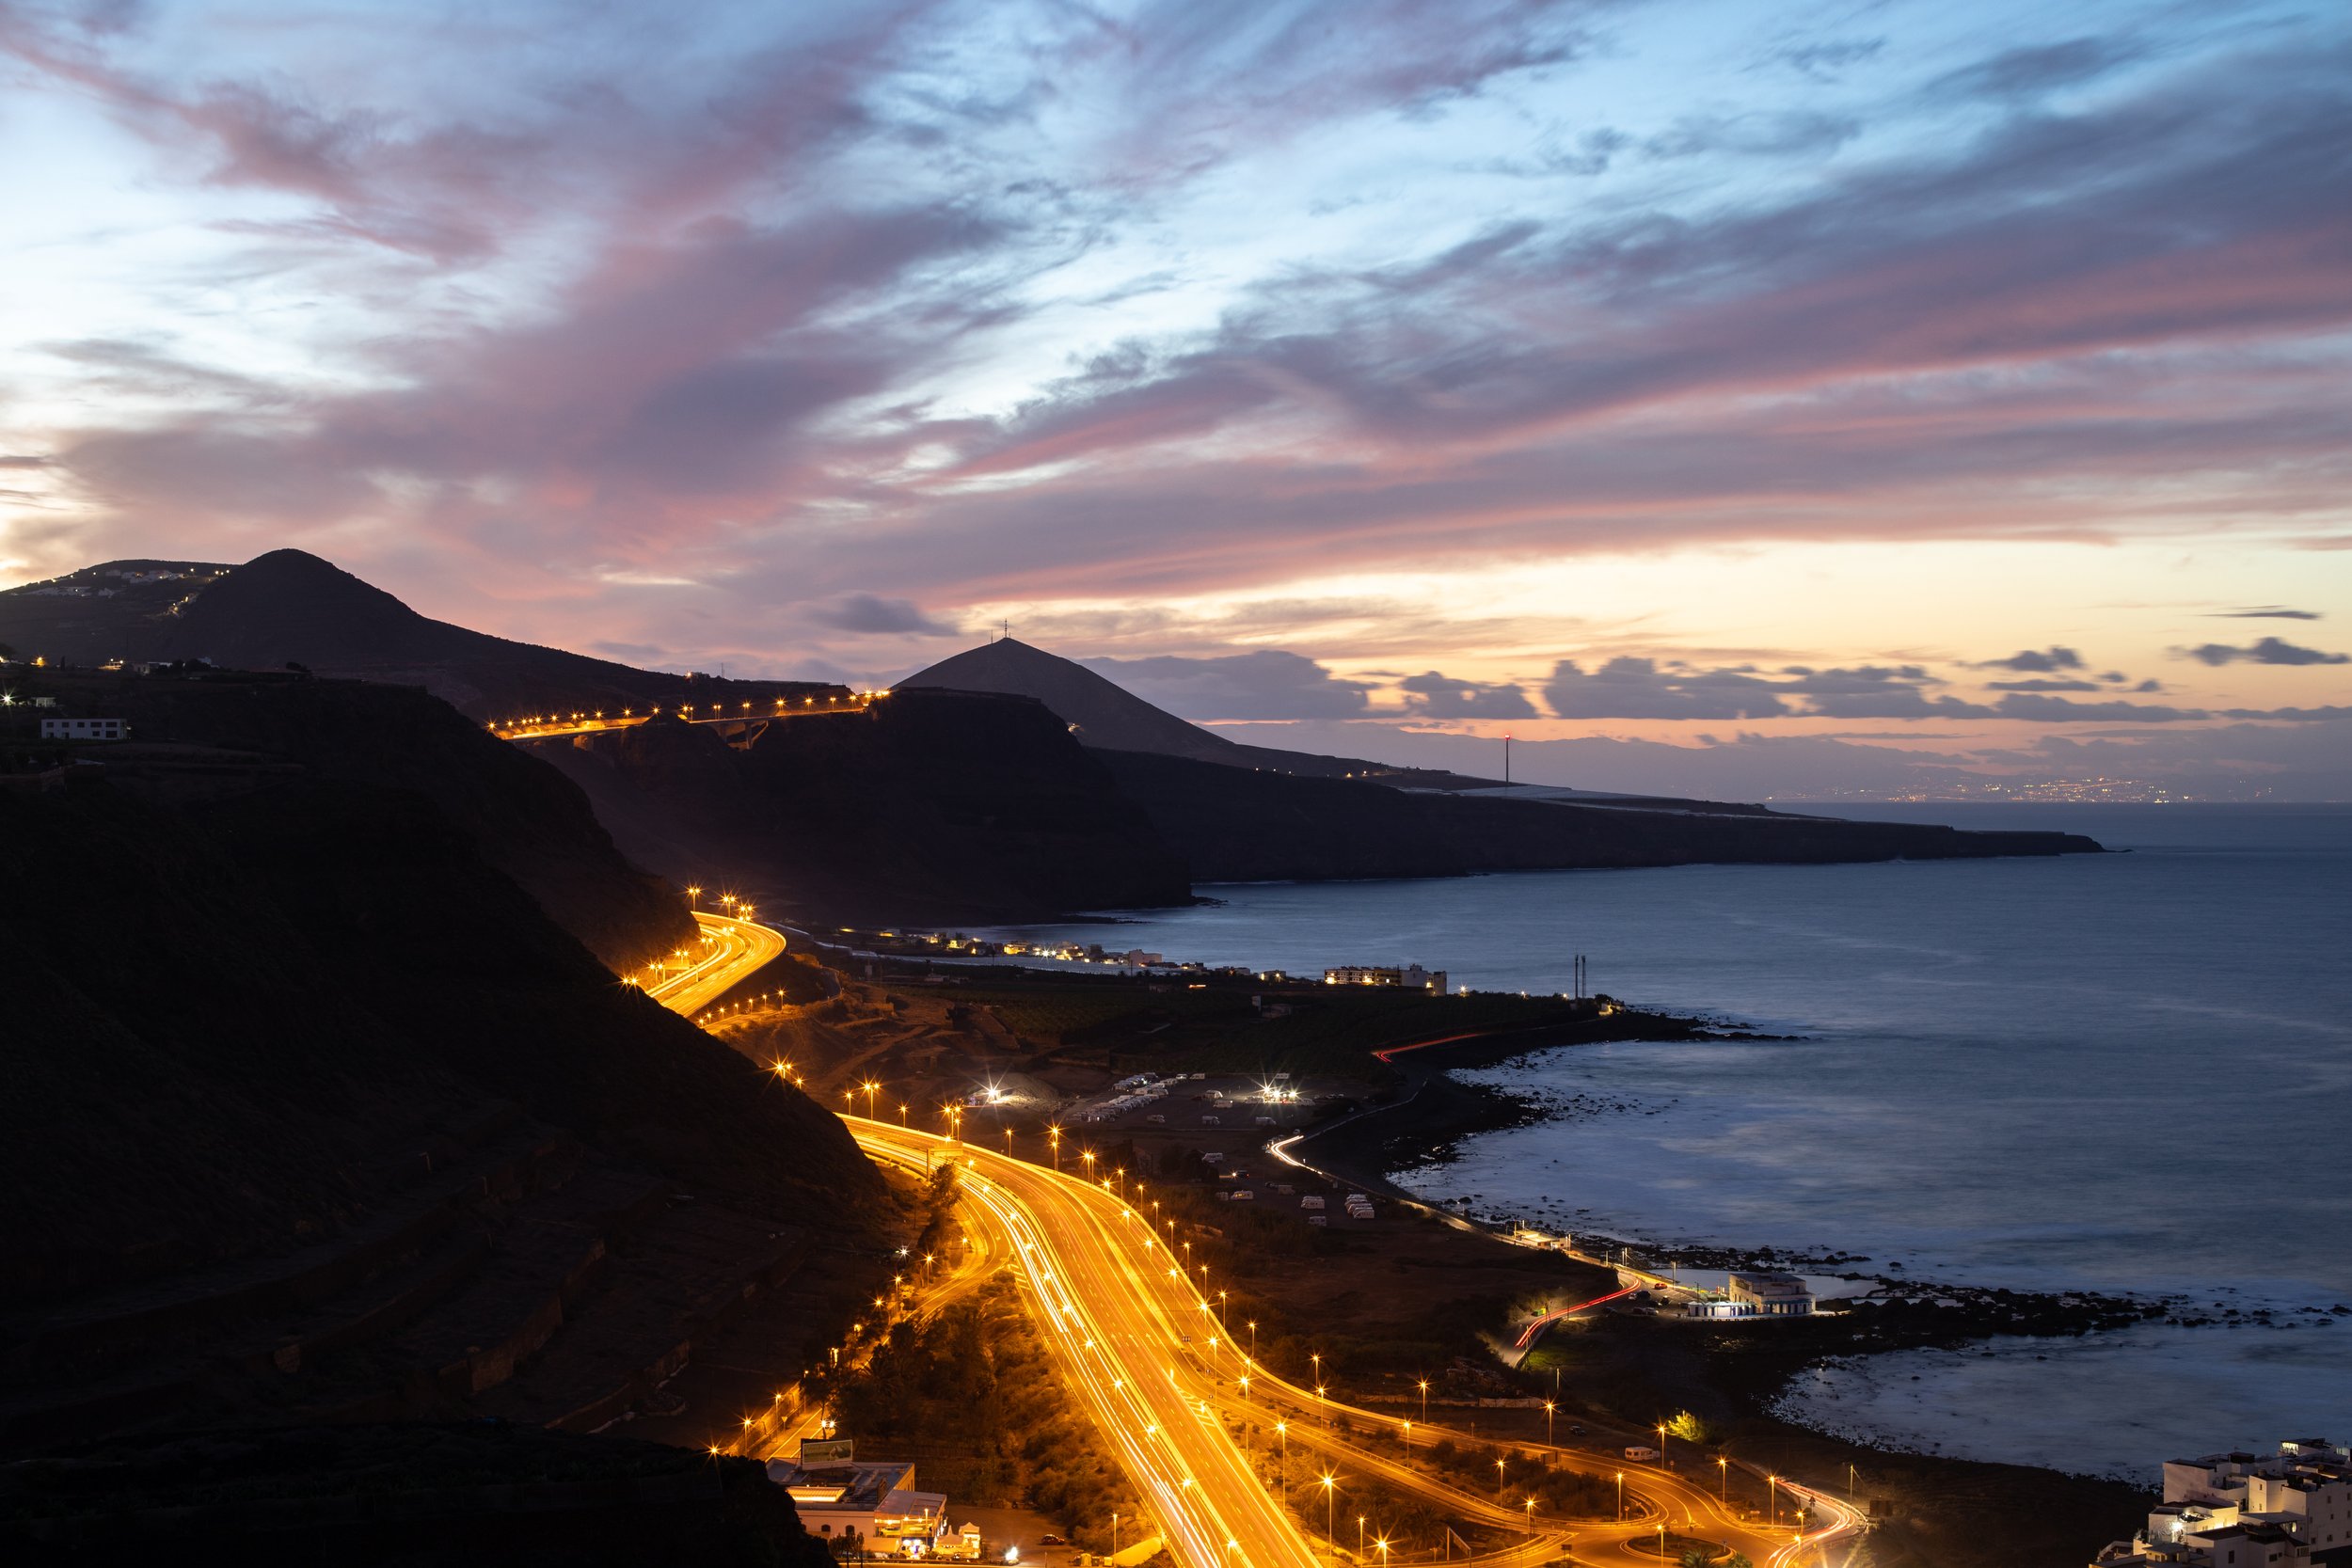 Long exposure image while the sun sets over the Northern coast of Gran Canaria.